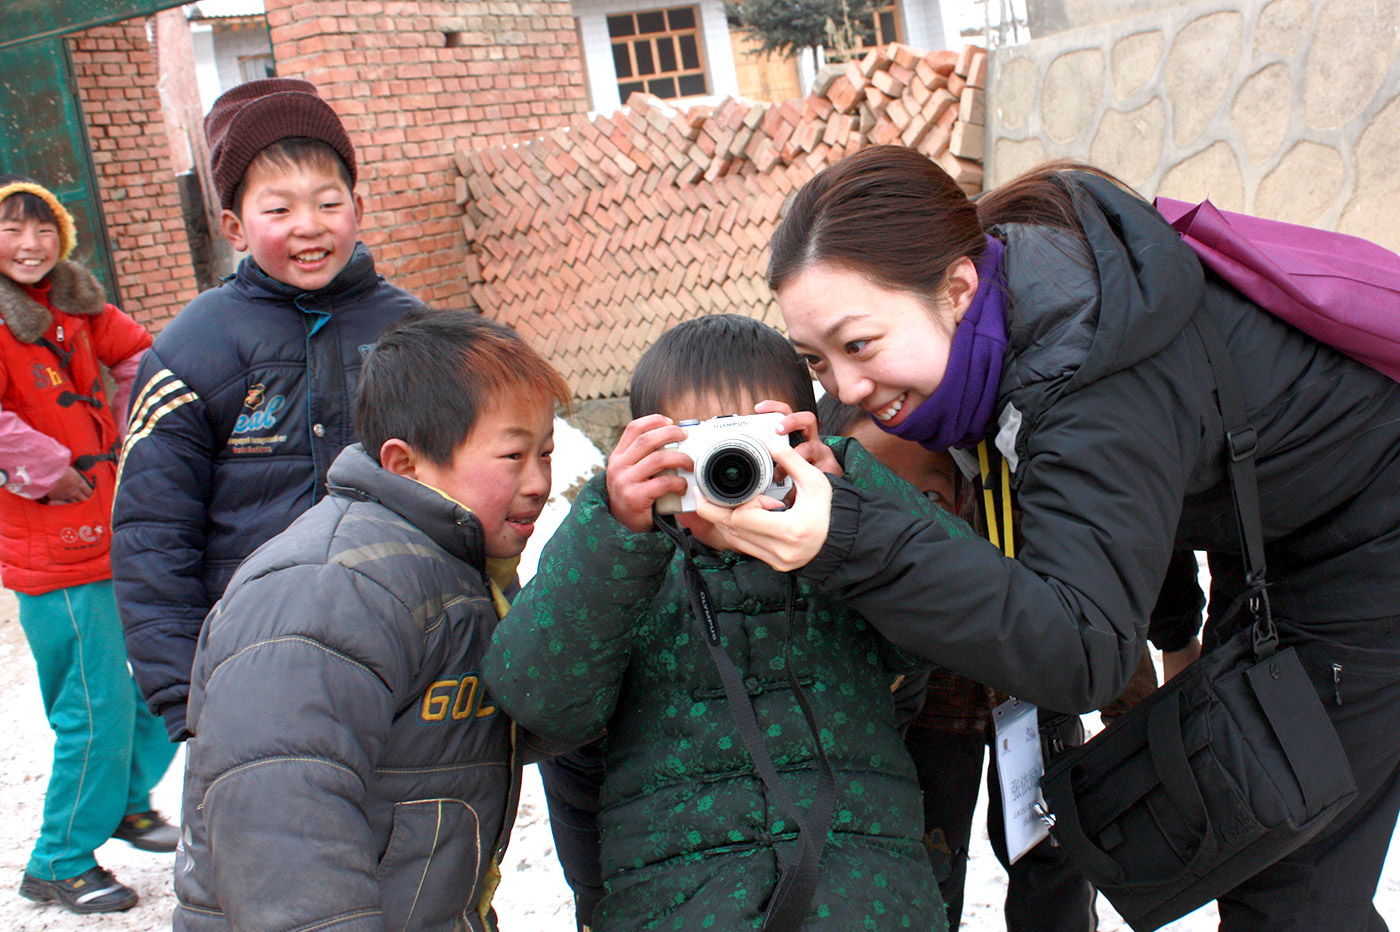 Having fun with kids after a community disaster relief session for a snow disaster in Gansu province